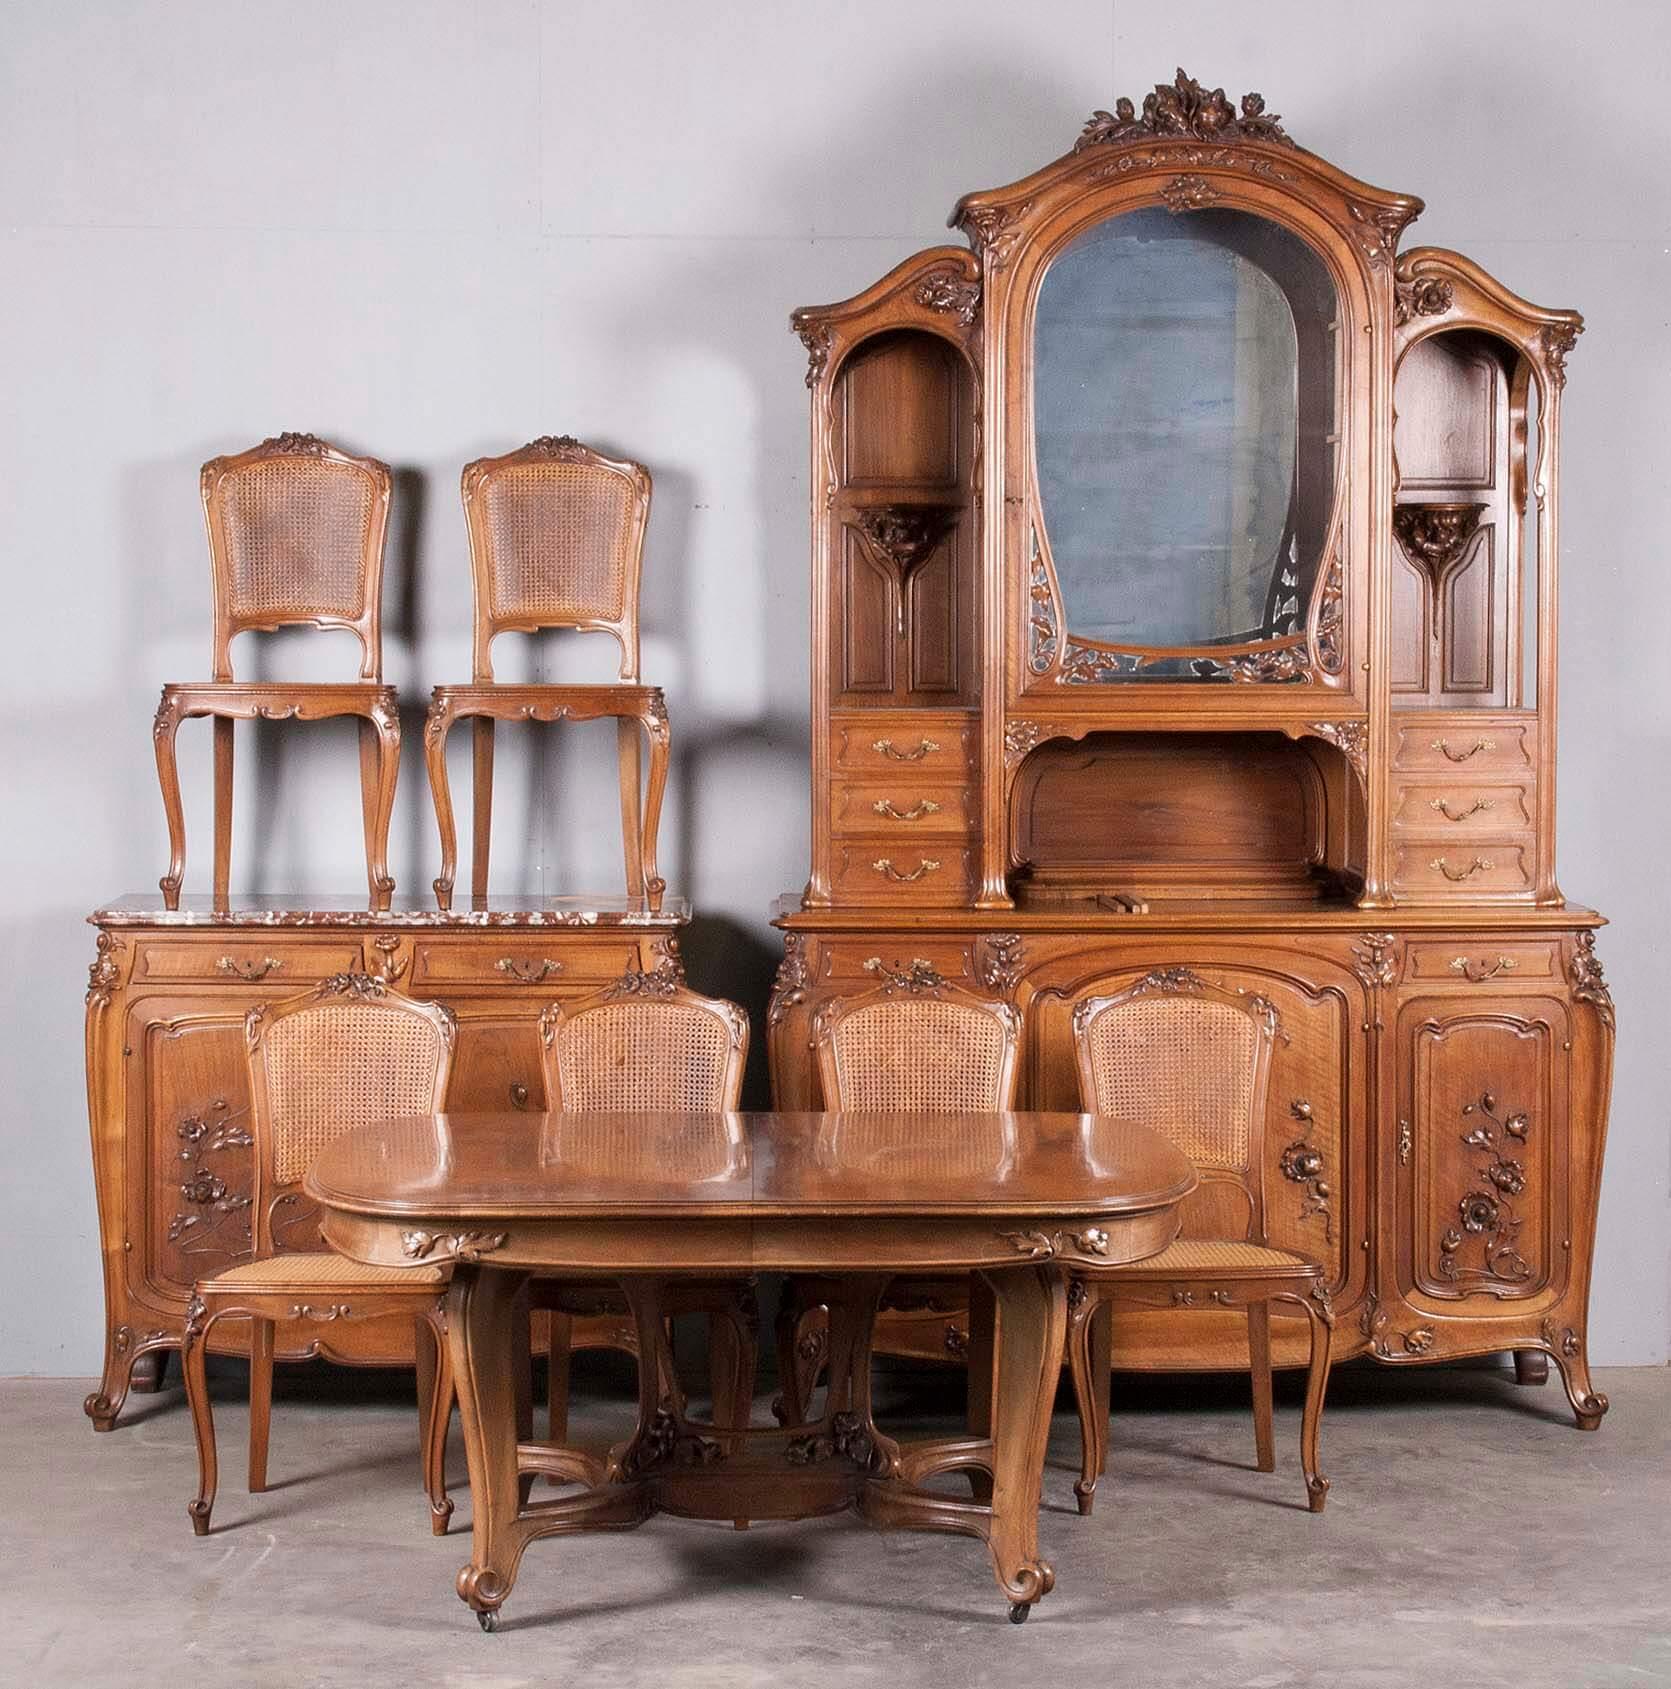 A stunning walnut dining set in Art Nouveau style.
Signed: Eugène Dienst & Fils, France, Paris

Large walnut table. Massive walnut base and burl walnut paneled top.
Decorated with carved flowers. Some stains on the top. 

Buffet cabinet with